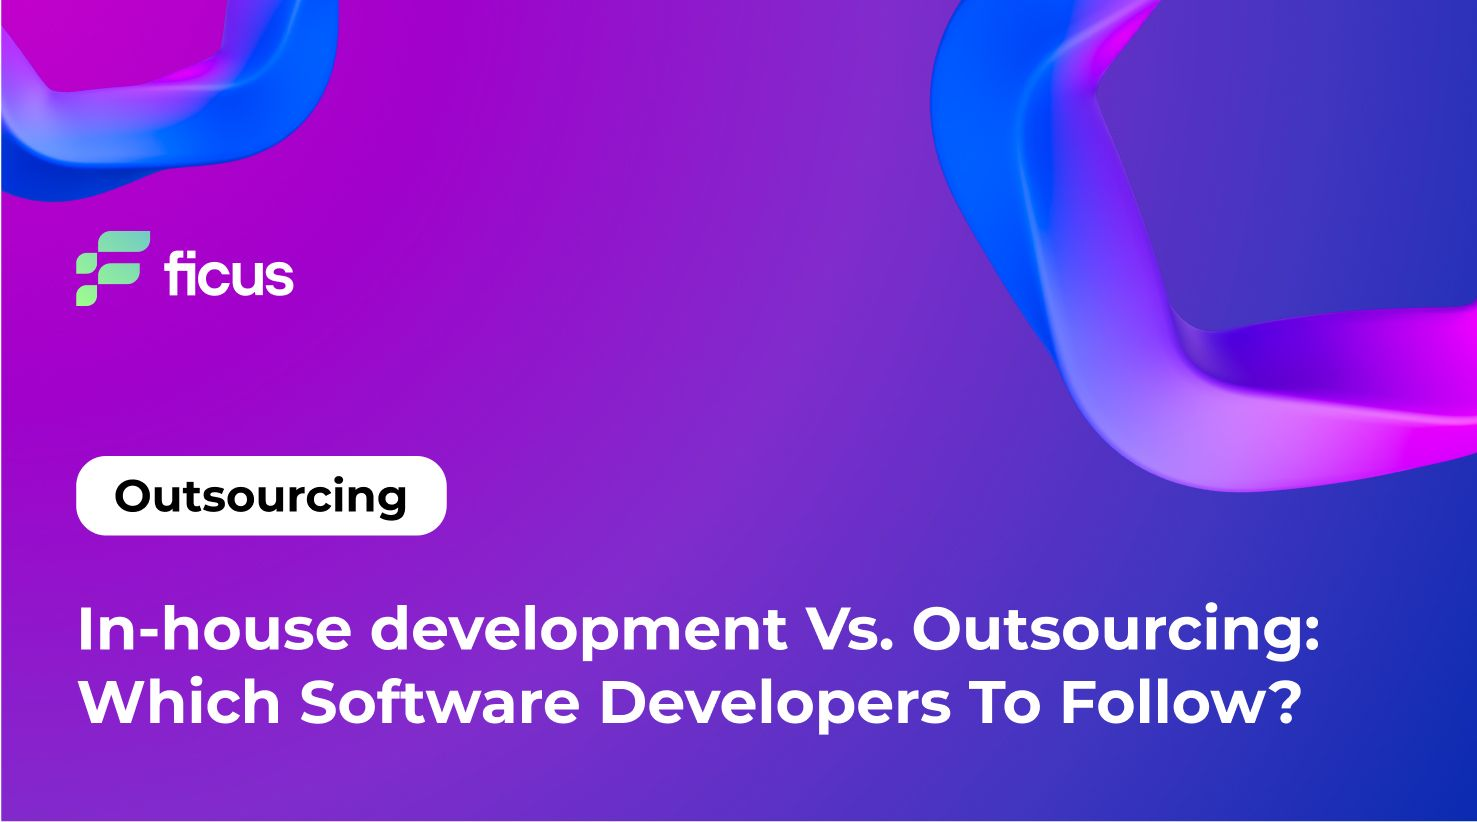 In-house development Vs. Outsourcing: Which Software Developers To Follow?